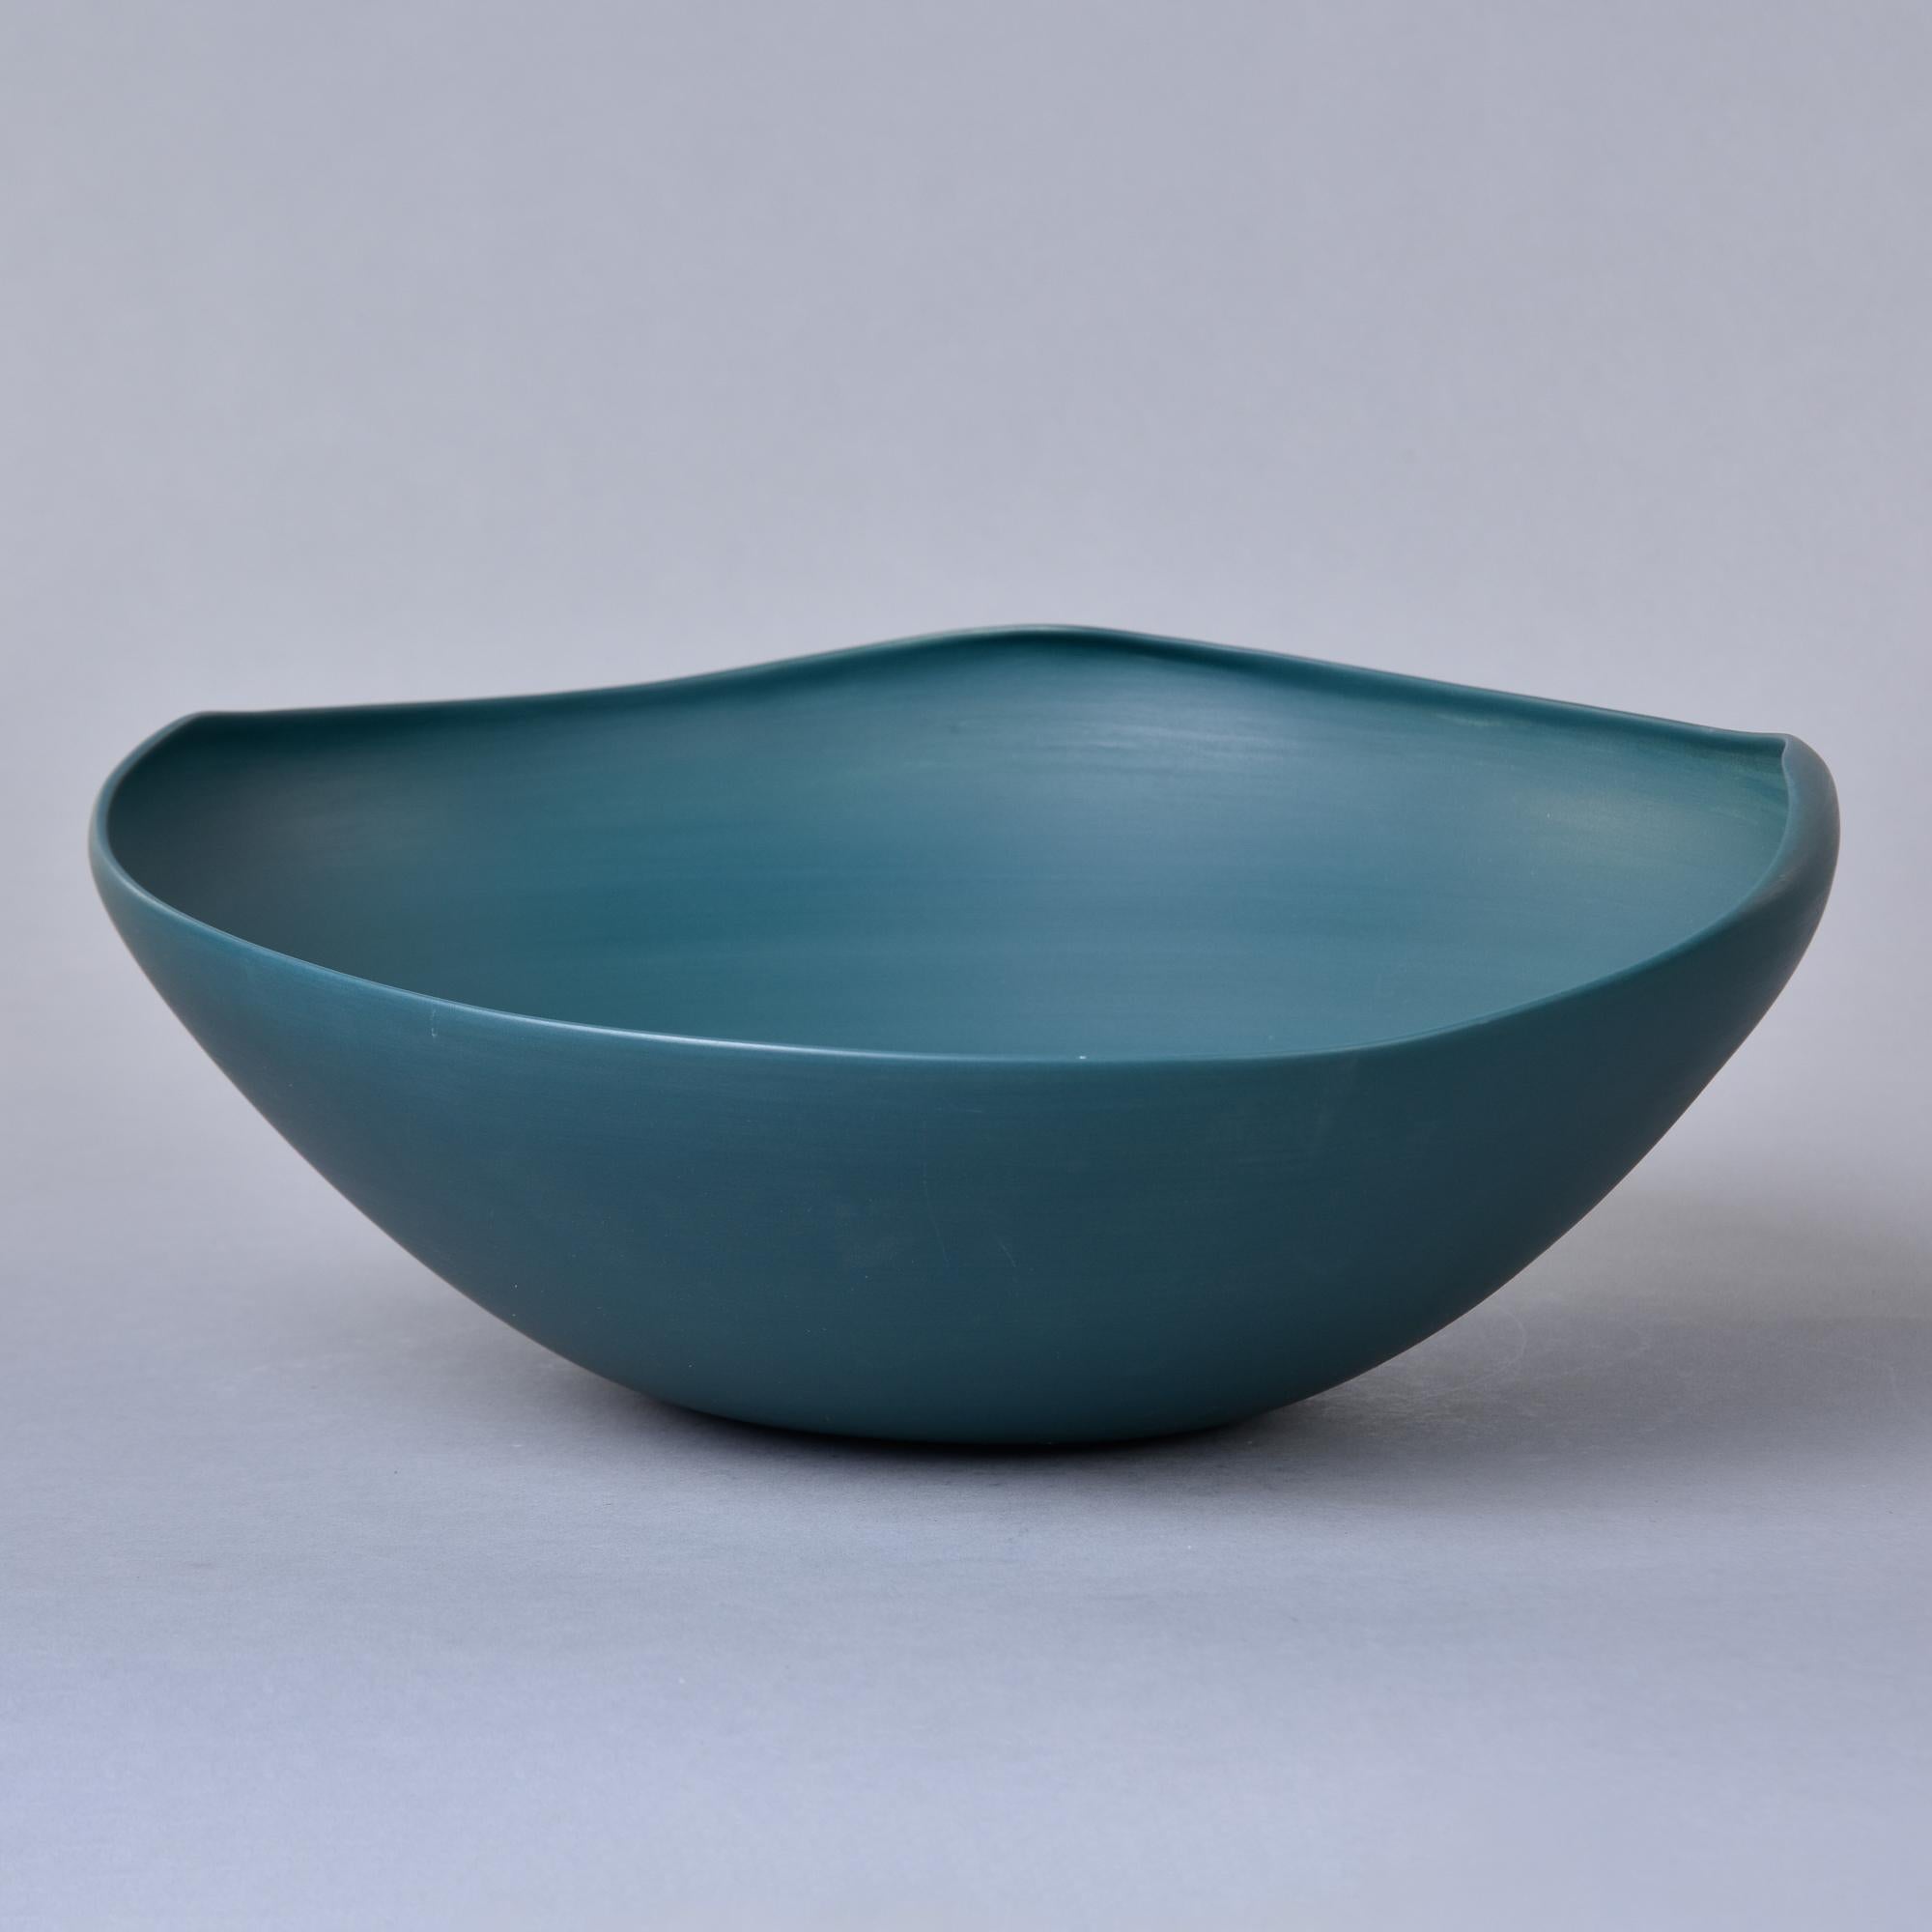 New and imported from Italy, this art pottery bowl by Rina Menardi is a thin-walled ceramic bowl with an irregular rim and saturated teal green glaze. Underside of base has maker’s mark. New with no flaws found. Other styles, colors and sizes by